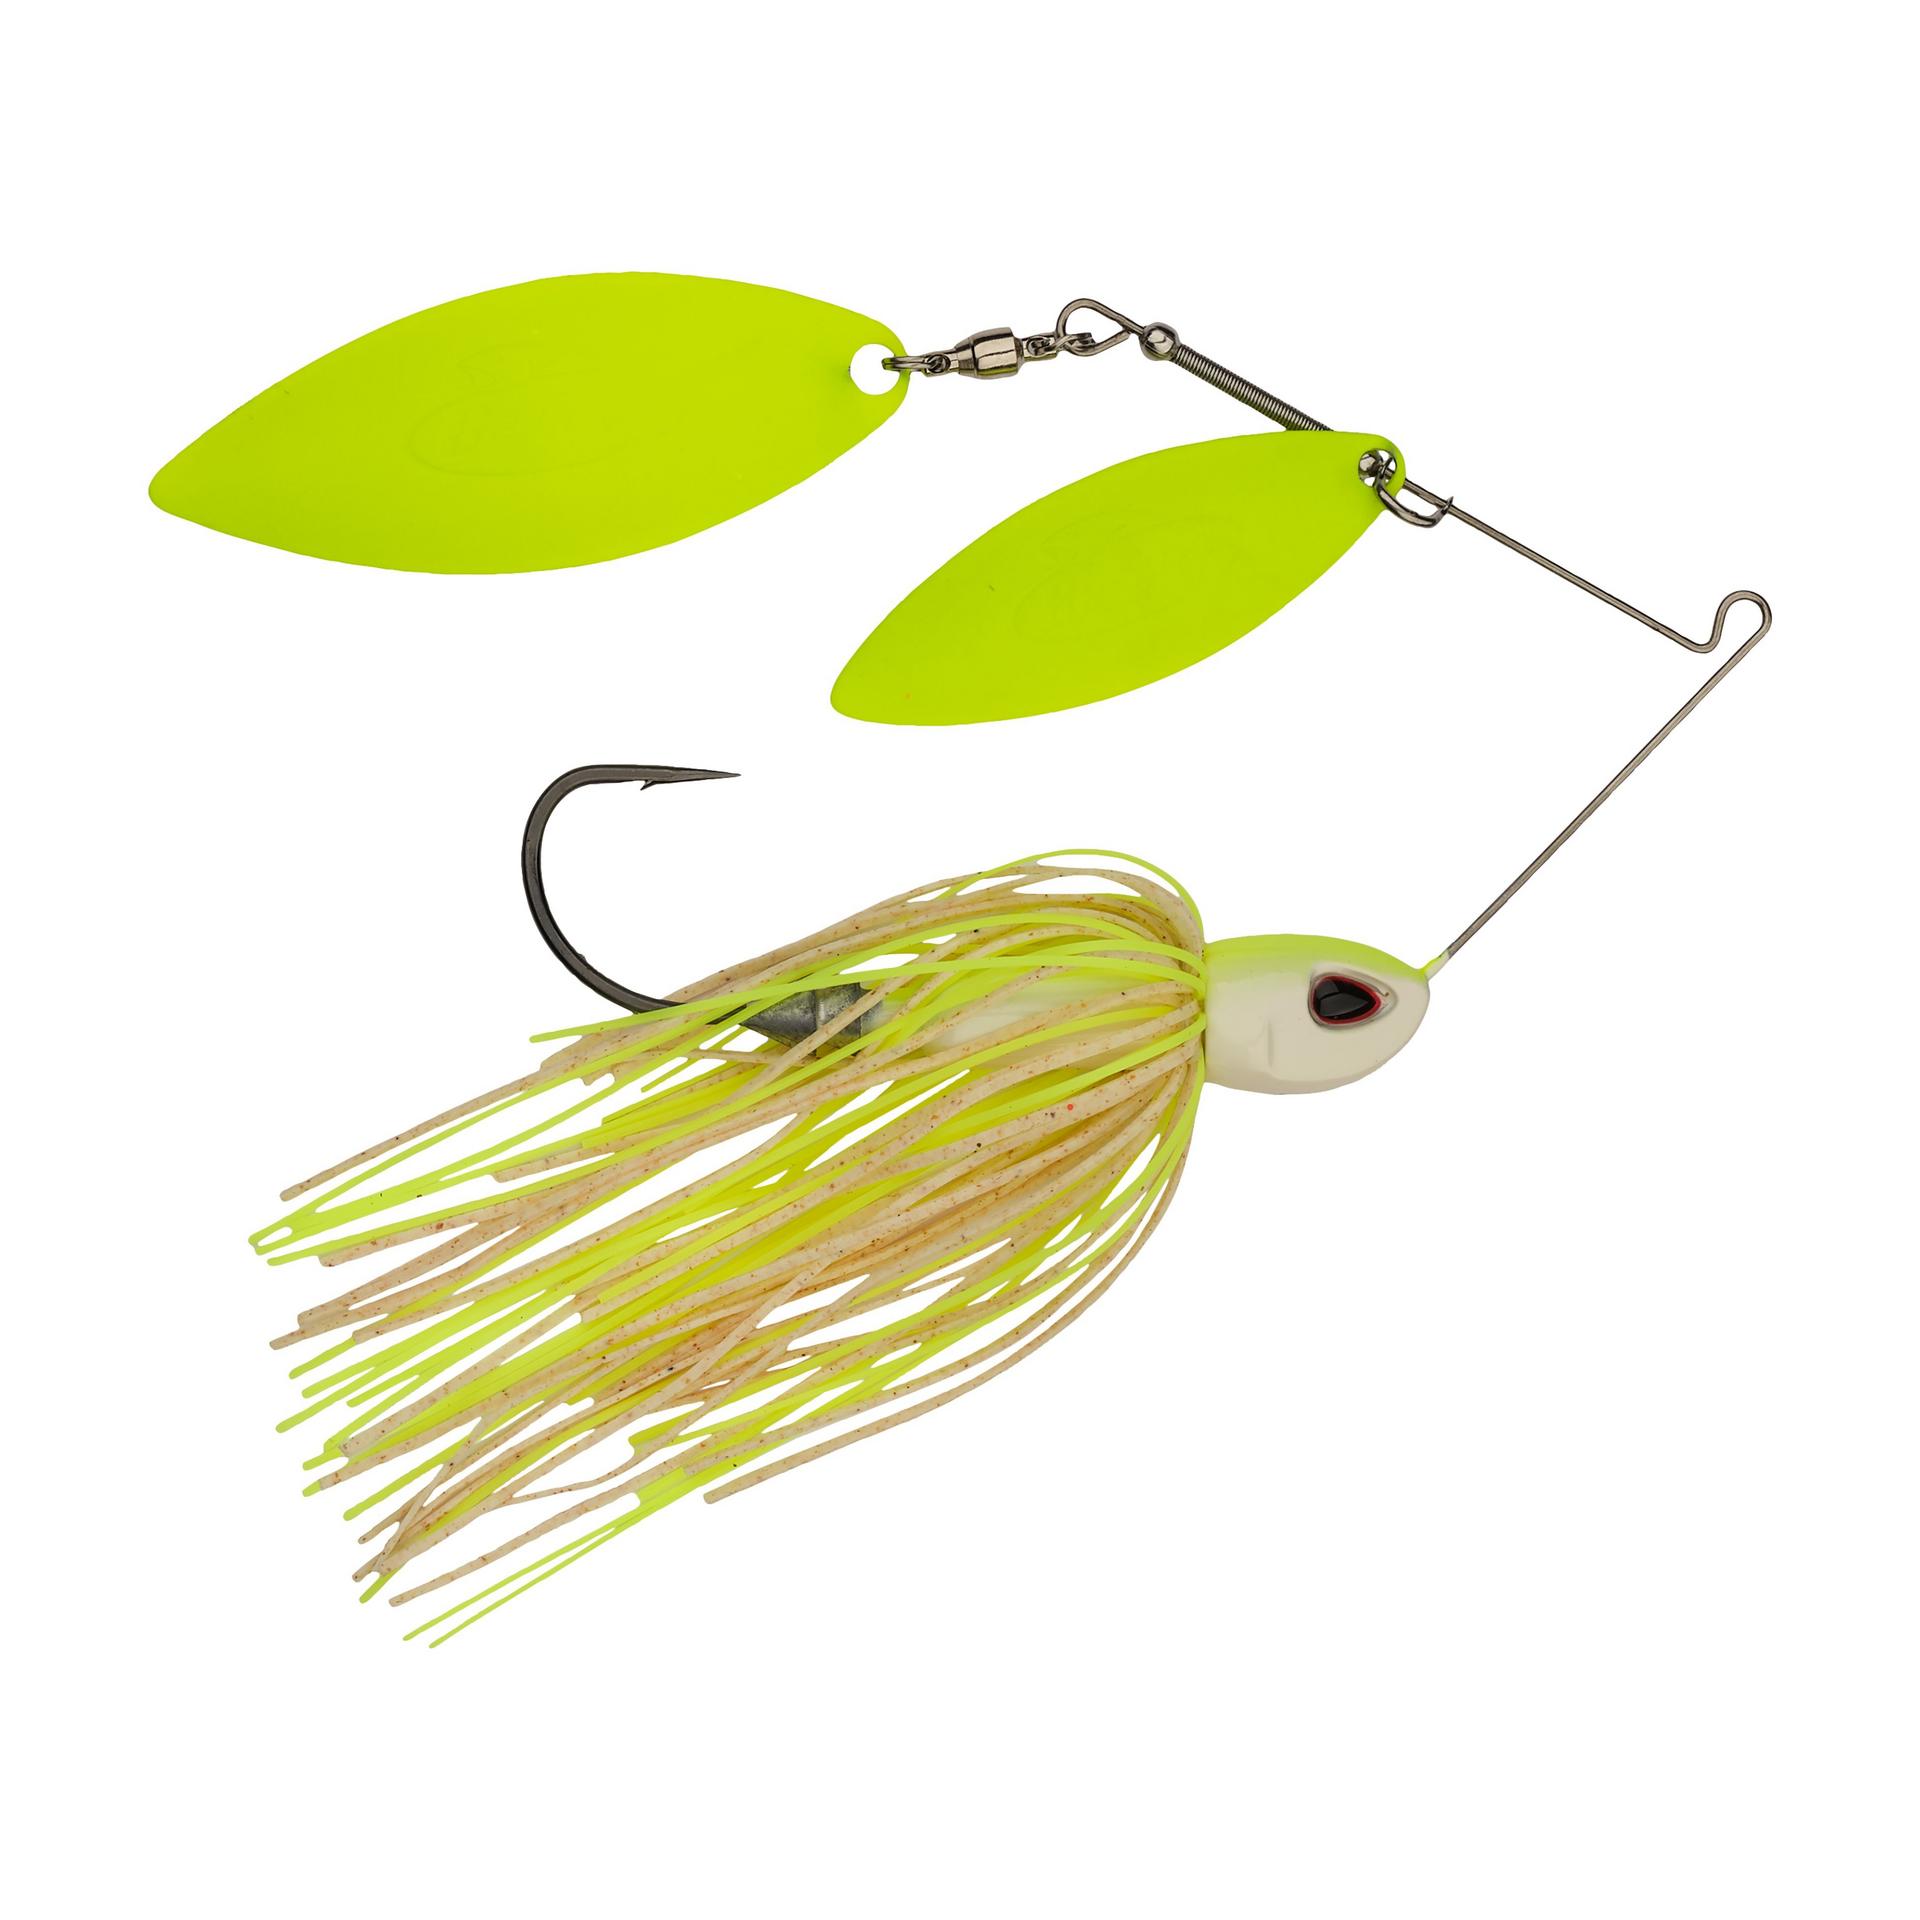 Power® Blade Compact Double-Willow